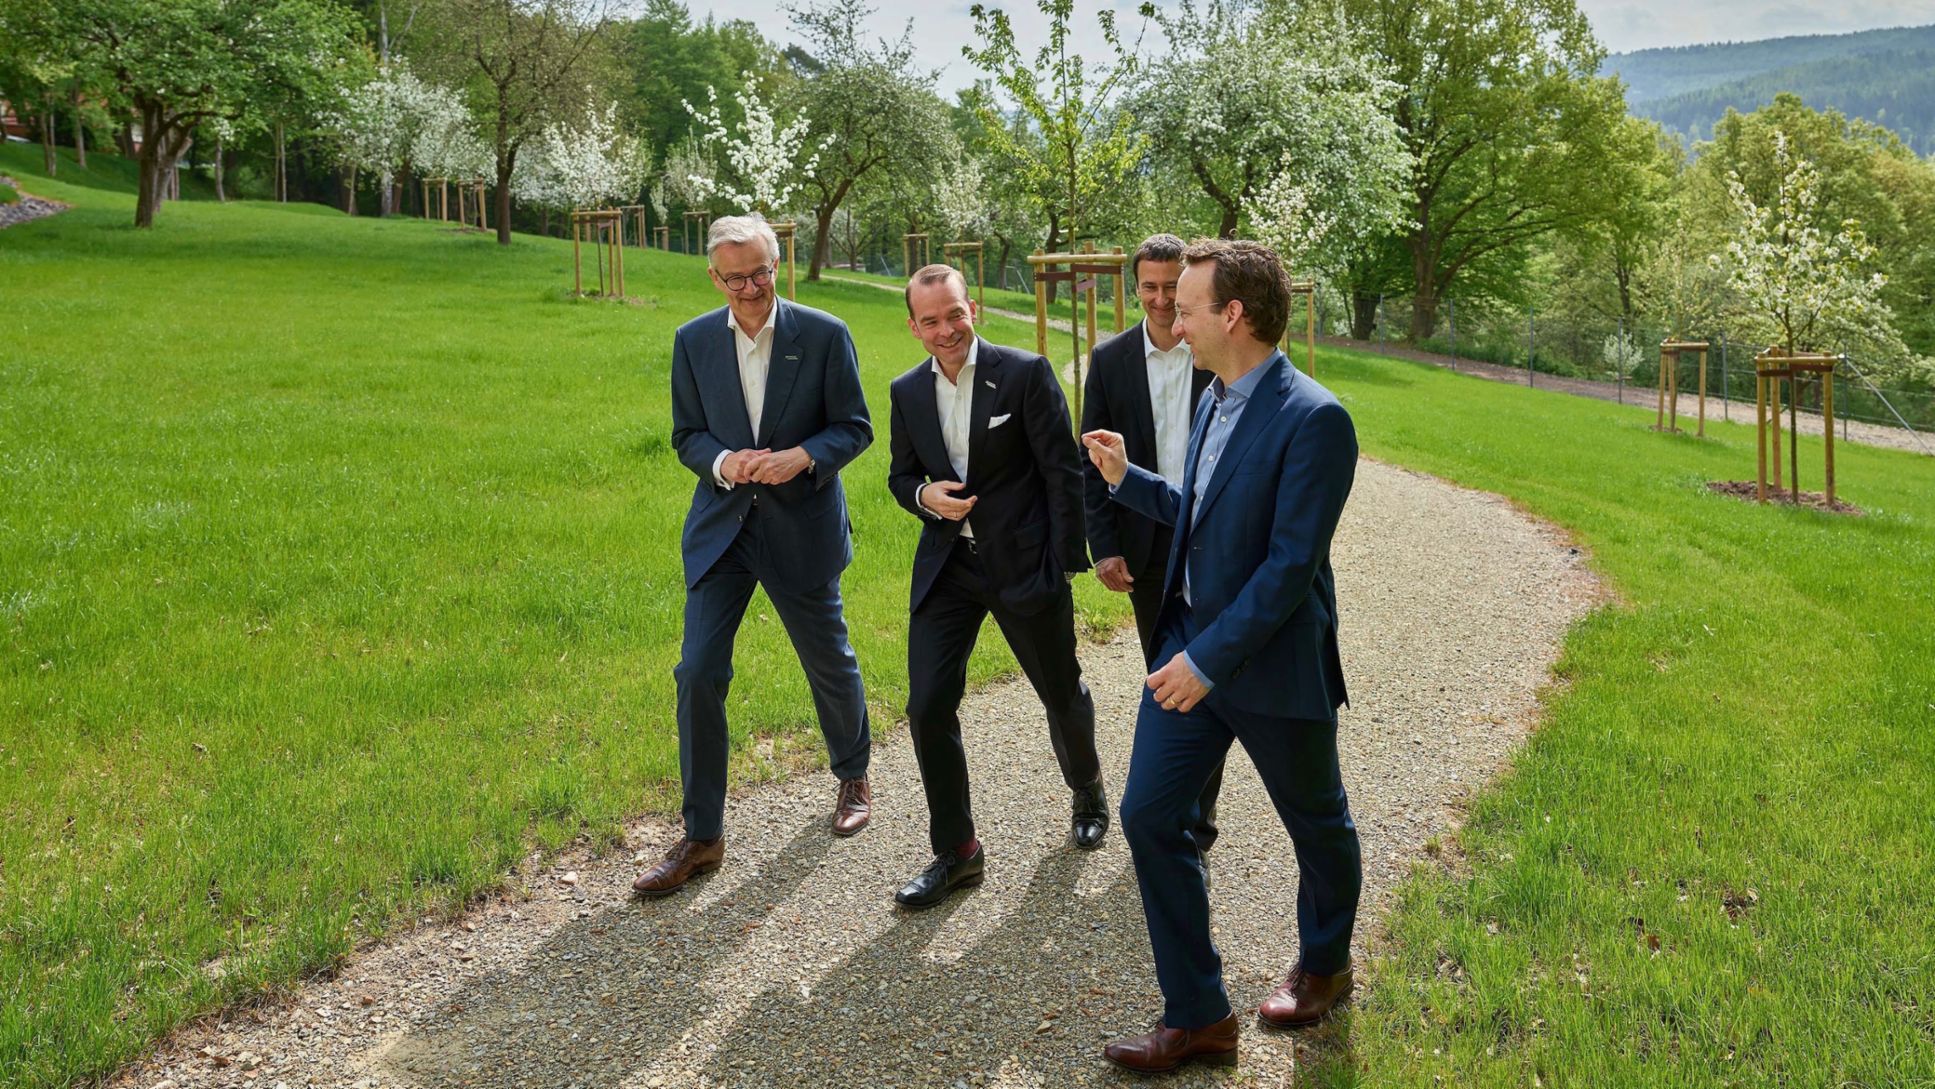 Walking meetings are on the agenda at B. Braun Melsungen AG, a leading medical technology company. Dr. Wolfgang Freibichler (Porsche Consulting, right) focuses on “nudges” that promote the creativity and health of employees. Photo: Porsche Consulting